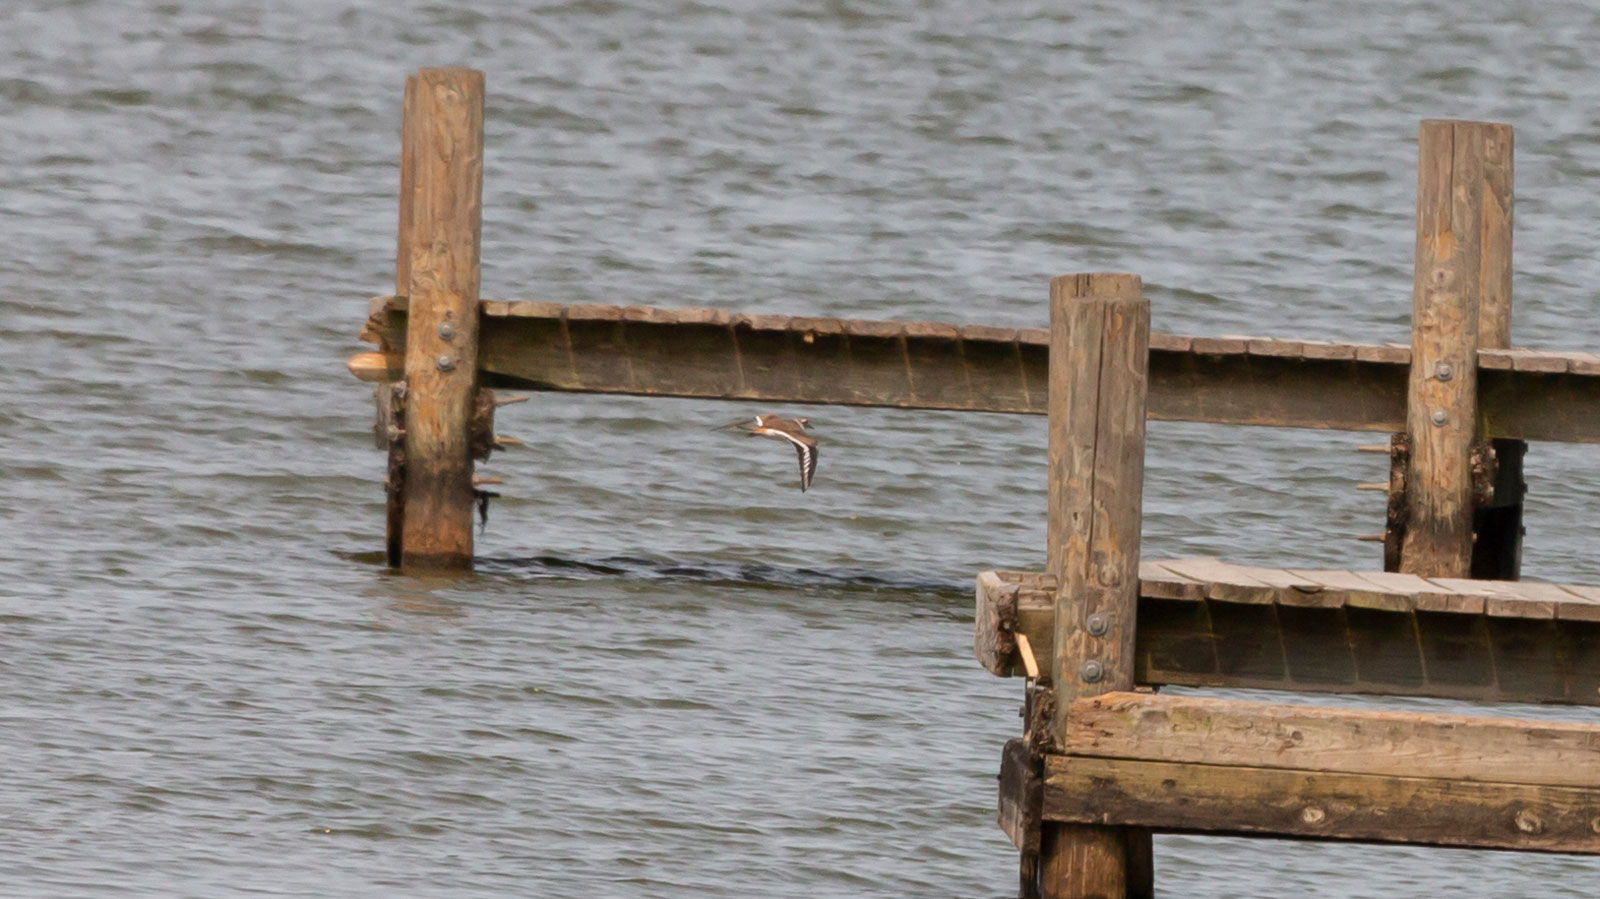 View of a killdeer flying over water through a wooden rail